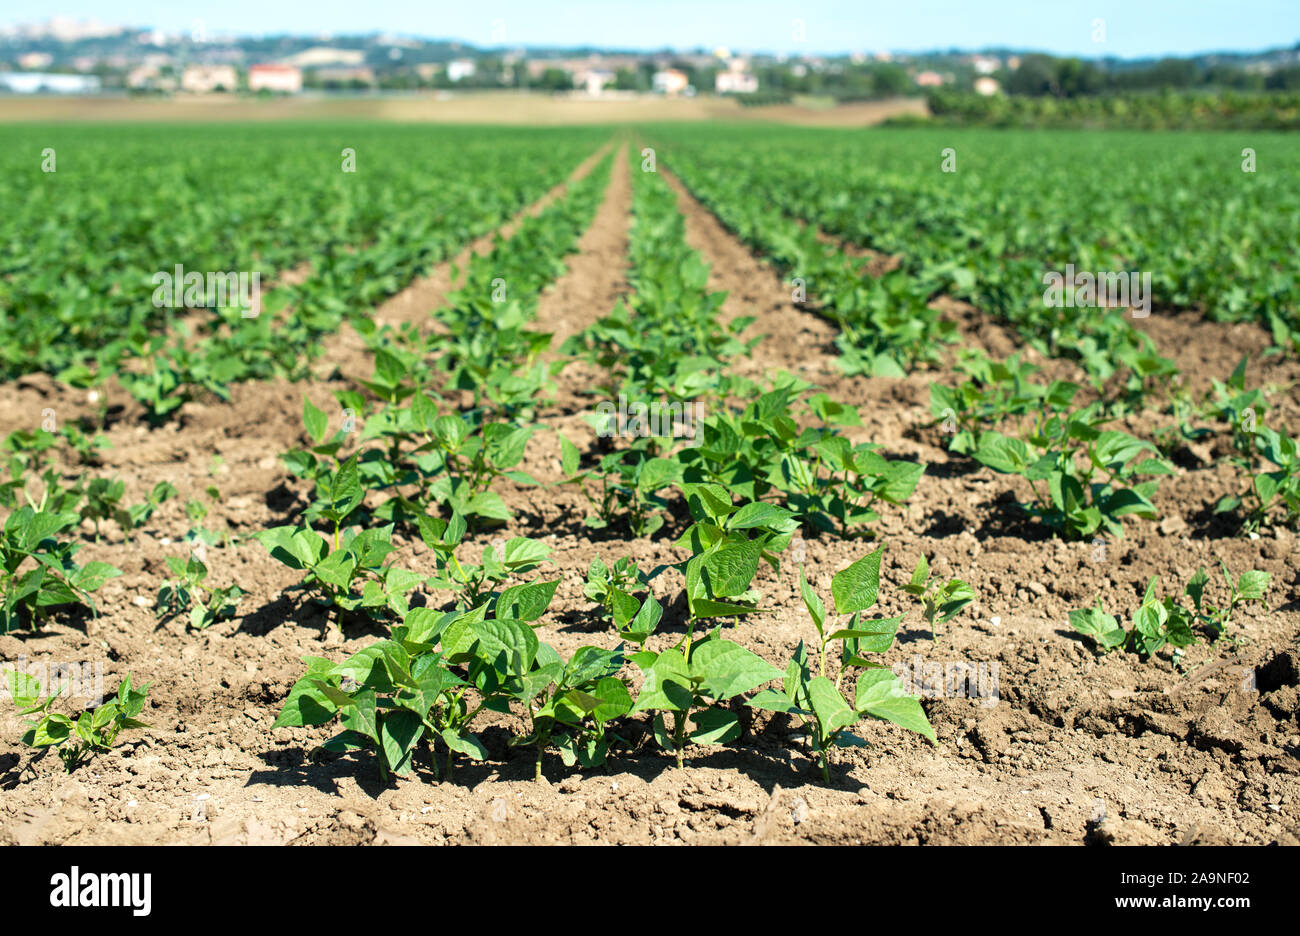 Legumes plantation. Soybean plants in rows. Sunny day. Stock Photo